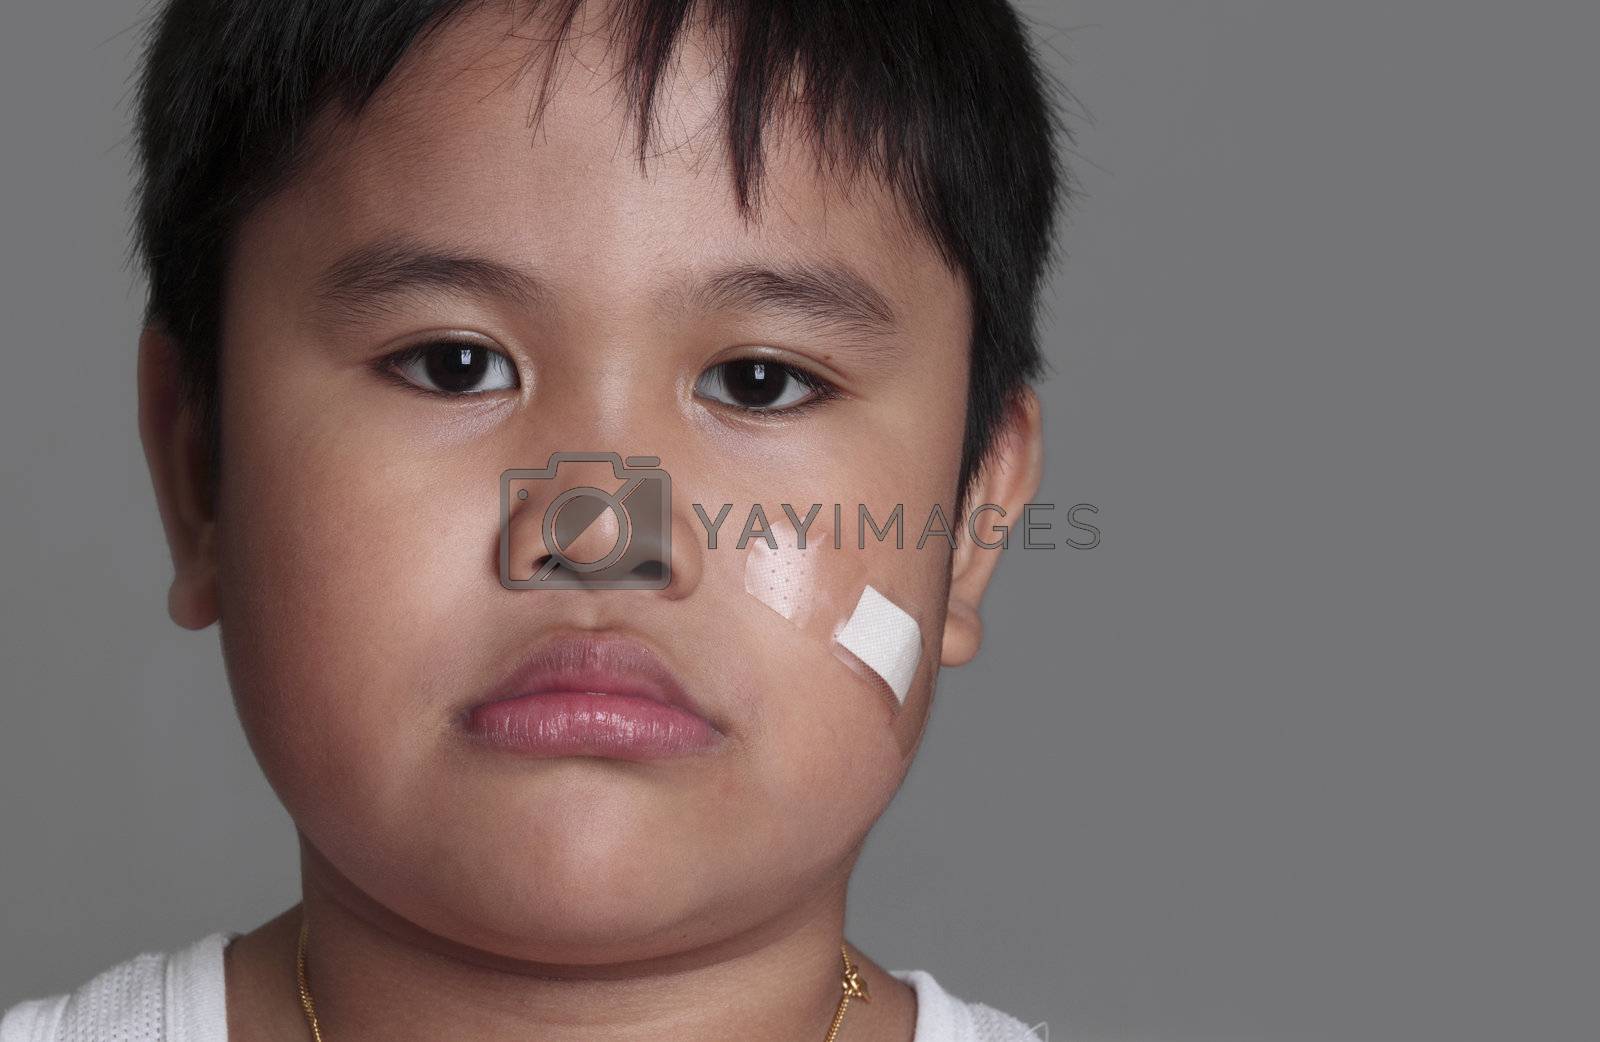 Royalty free image of Portrait of a young boy by sacatani